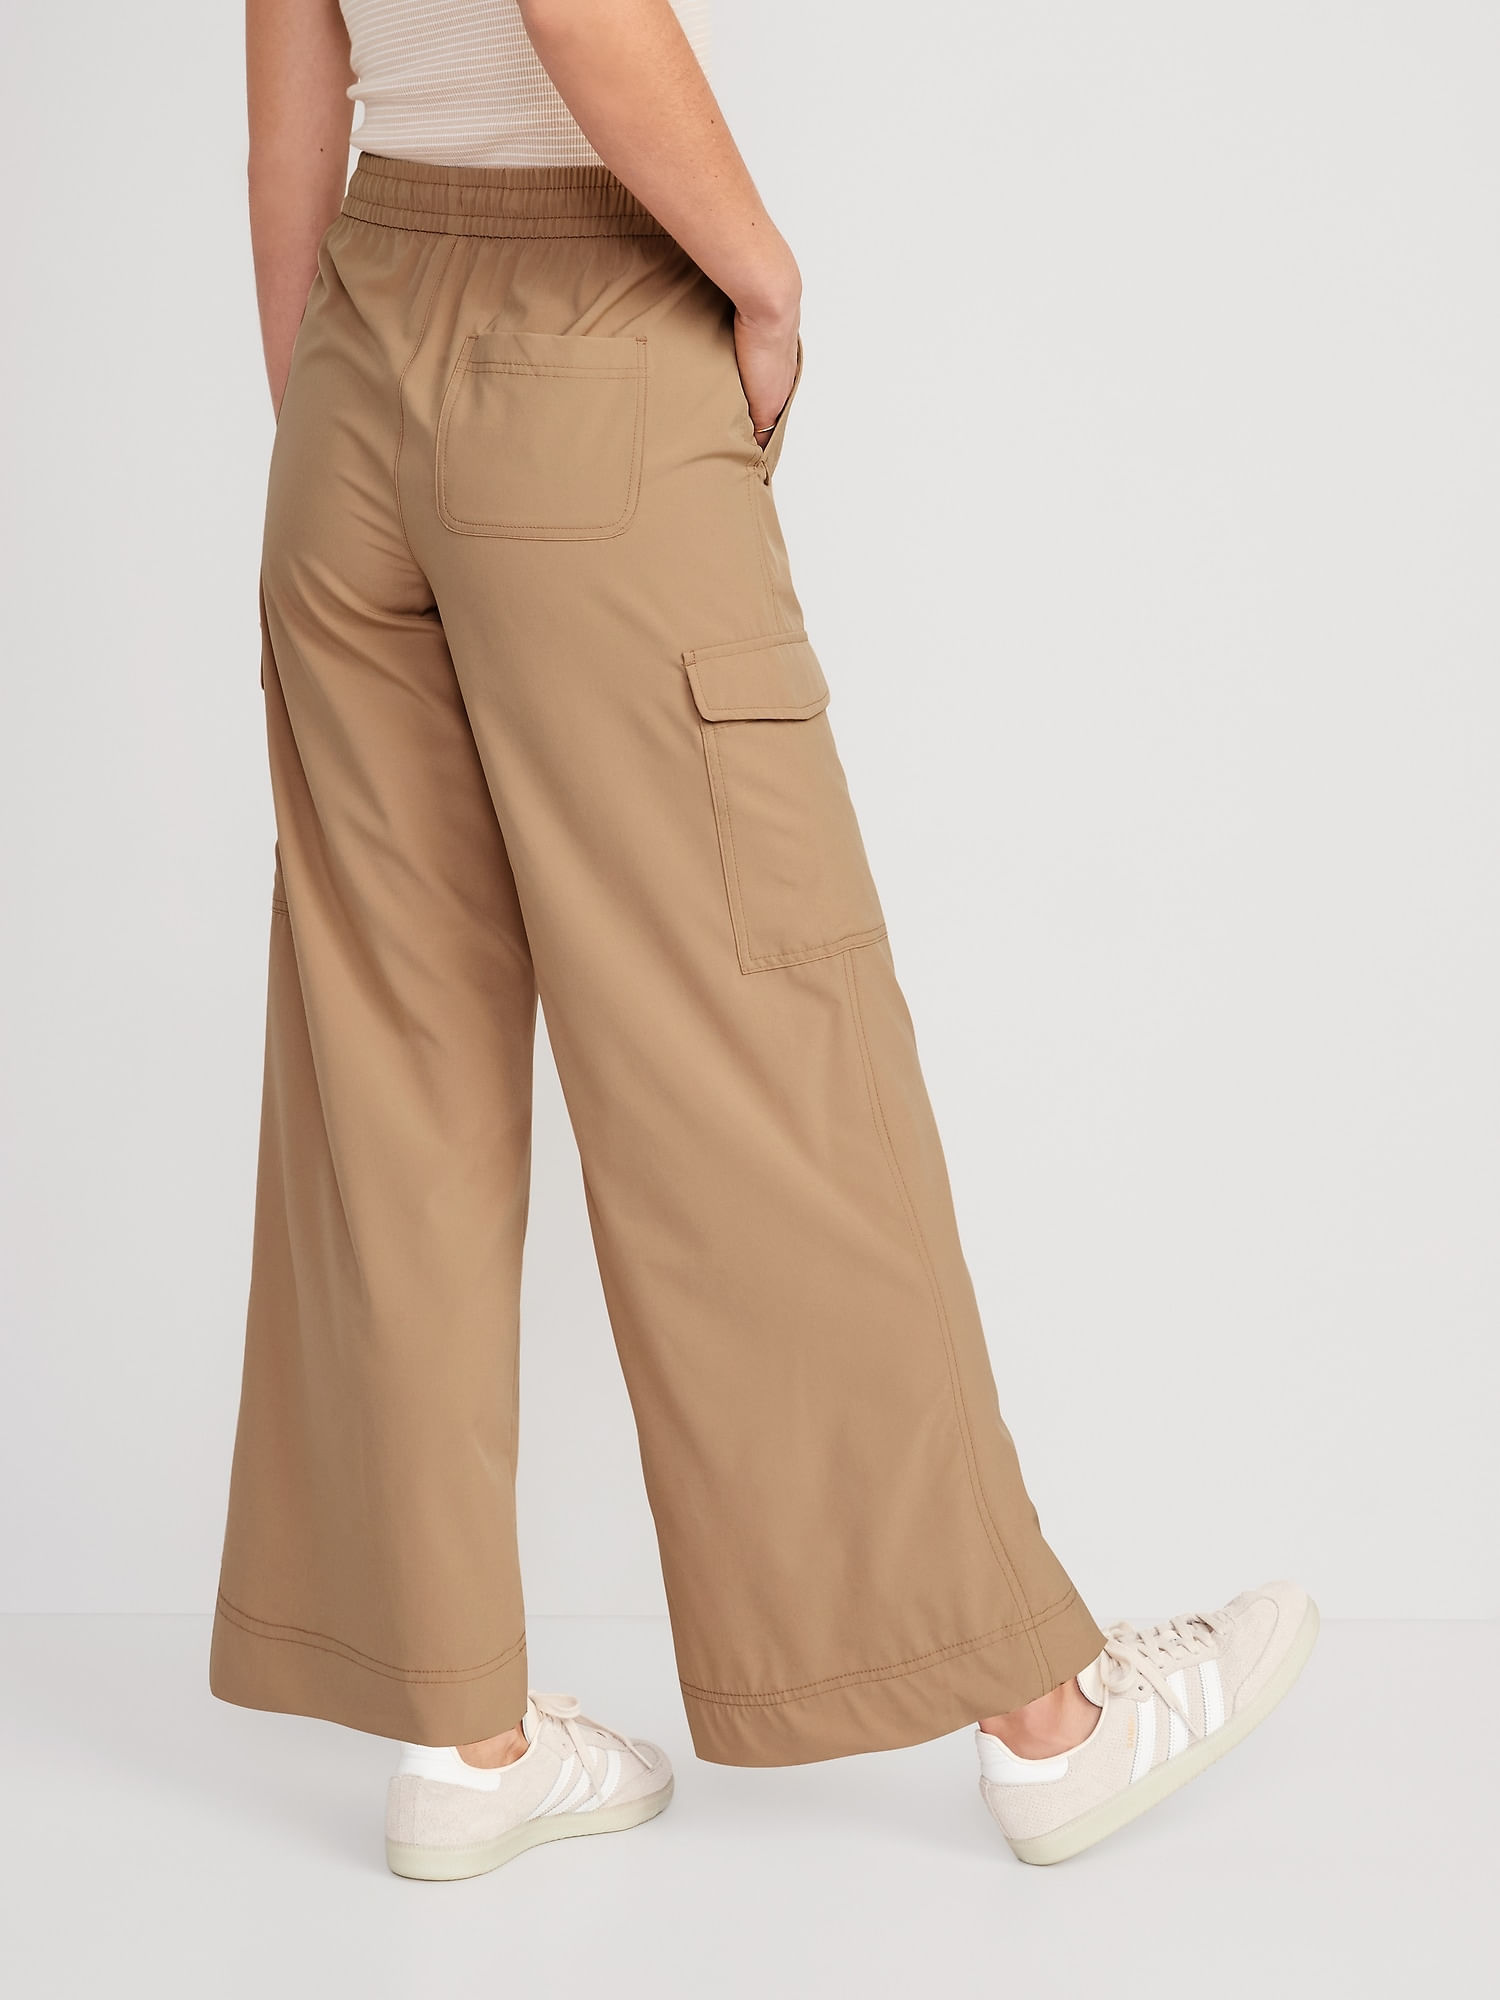 Pantalones Active tipo Cargo StretchTech Old Navy para Mujer